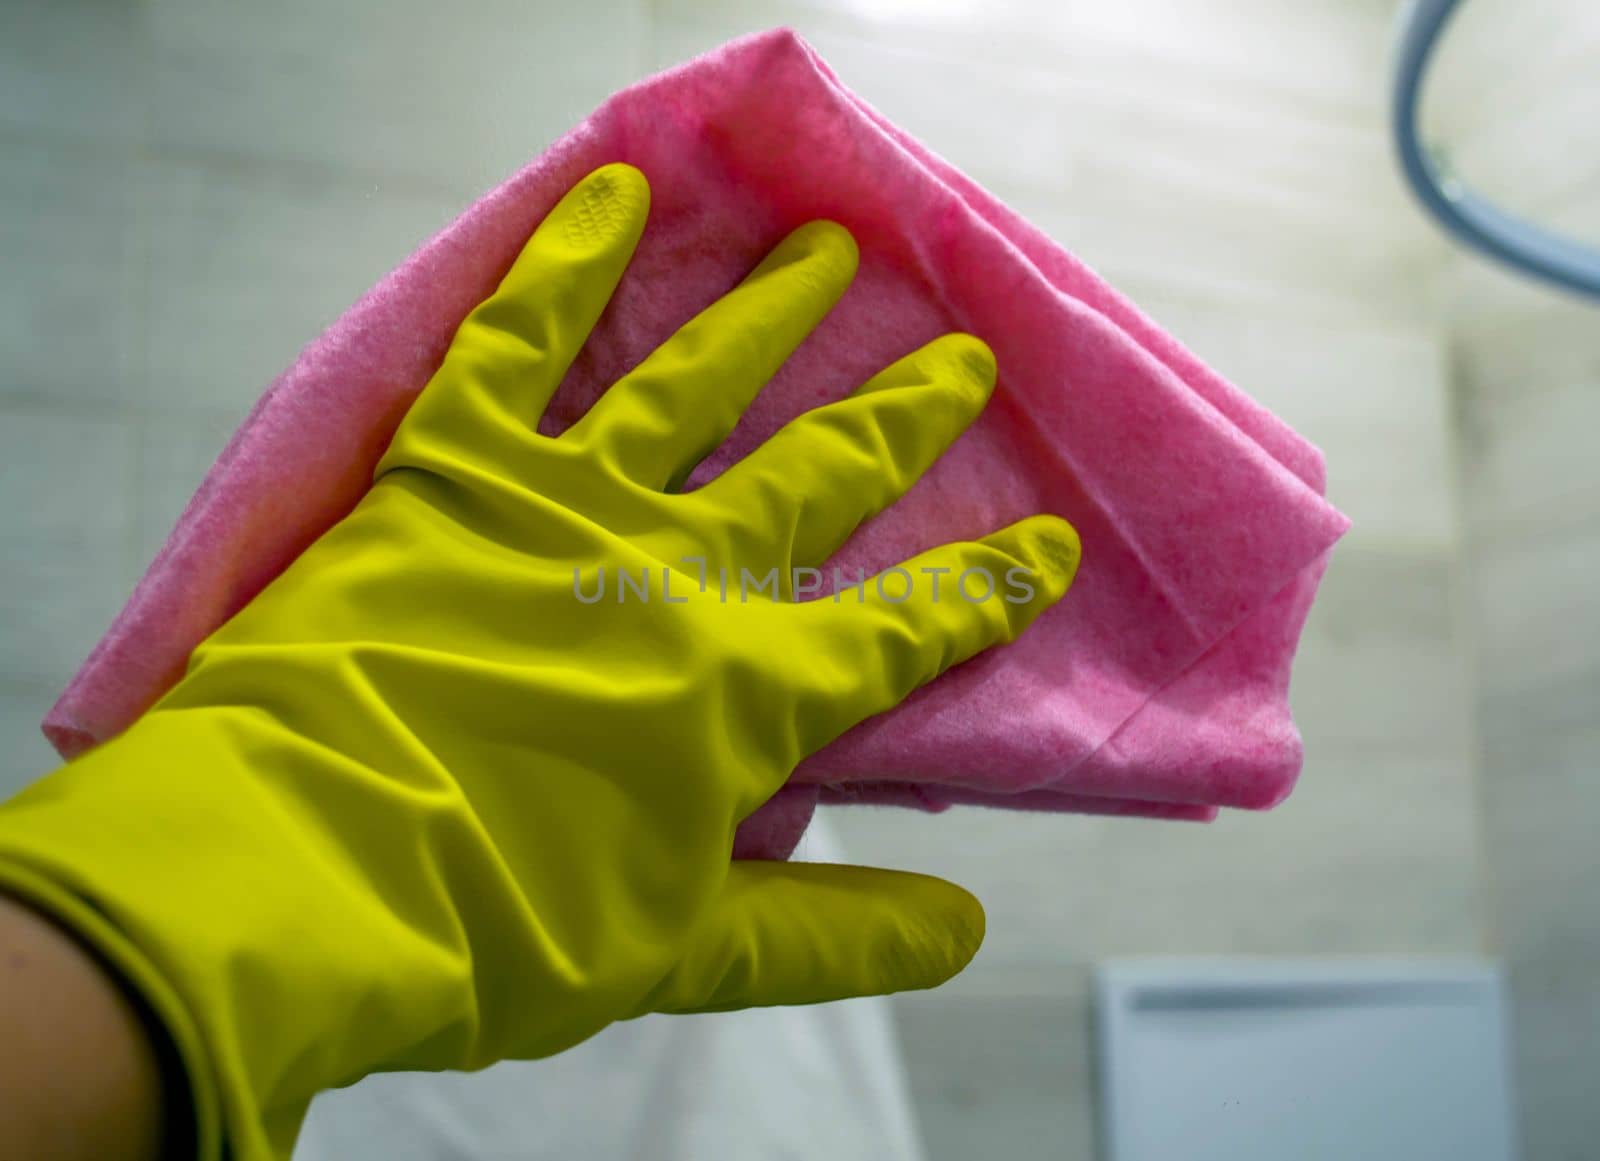 Cleaning. In the photo, a hand in a rubber glove washes a mirror in the bathroom with a rag.